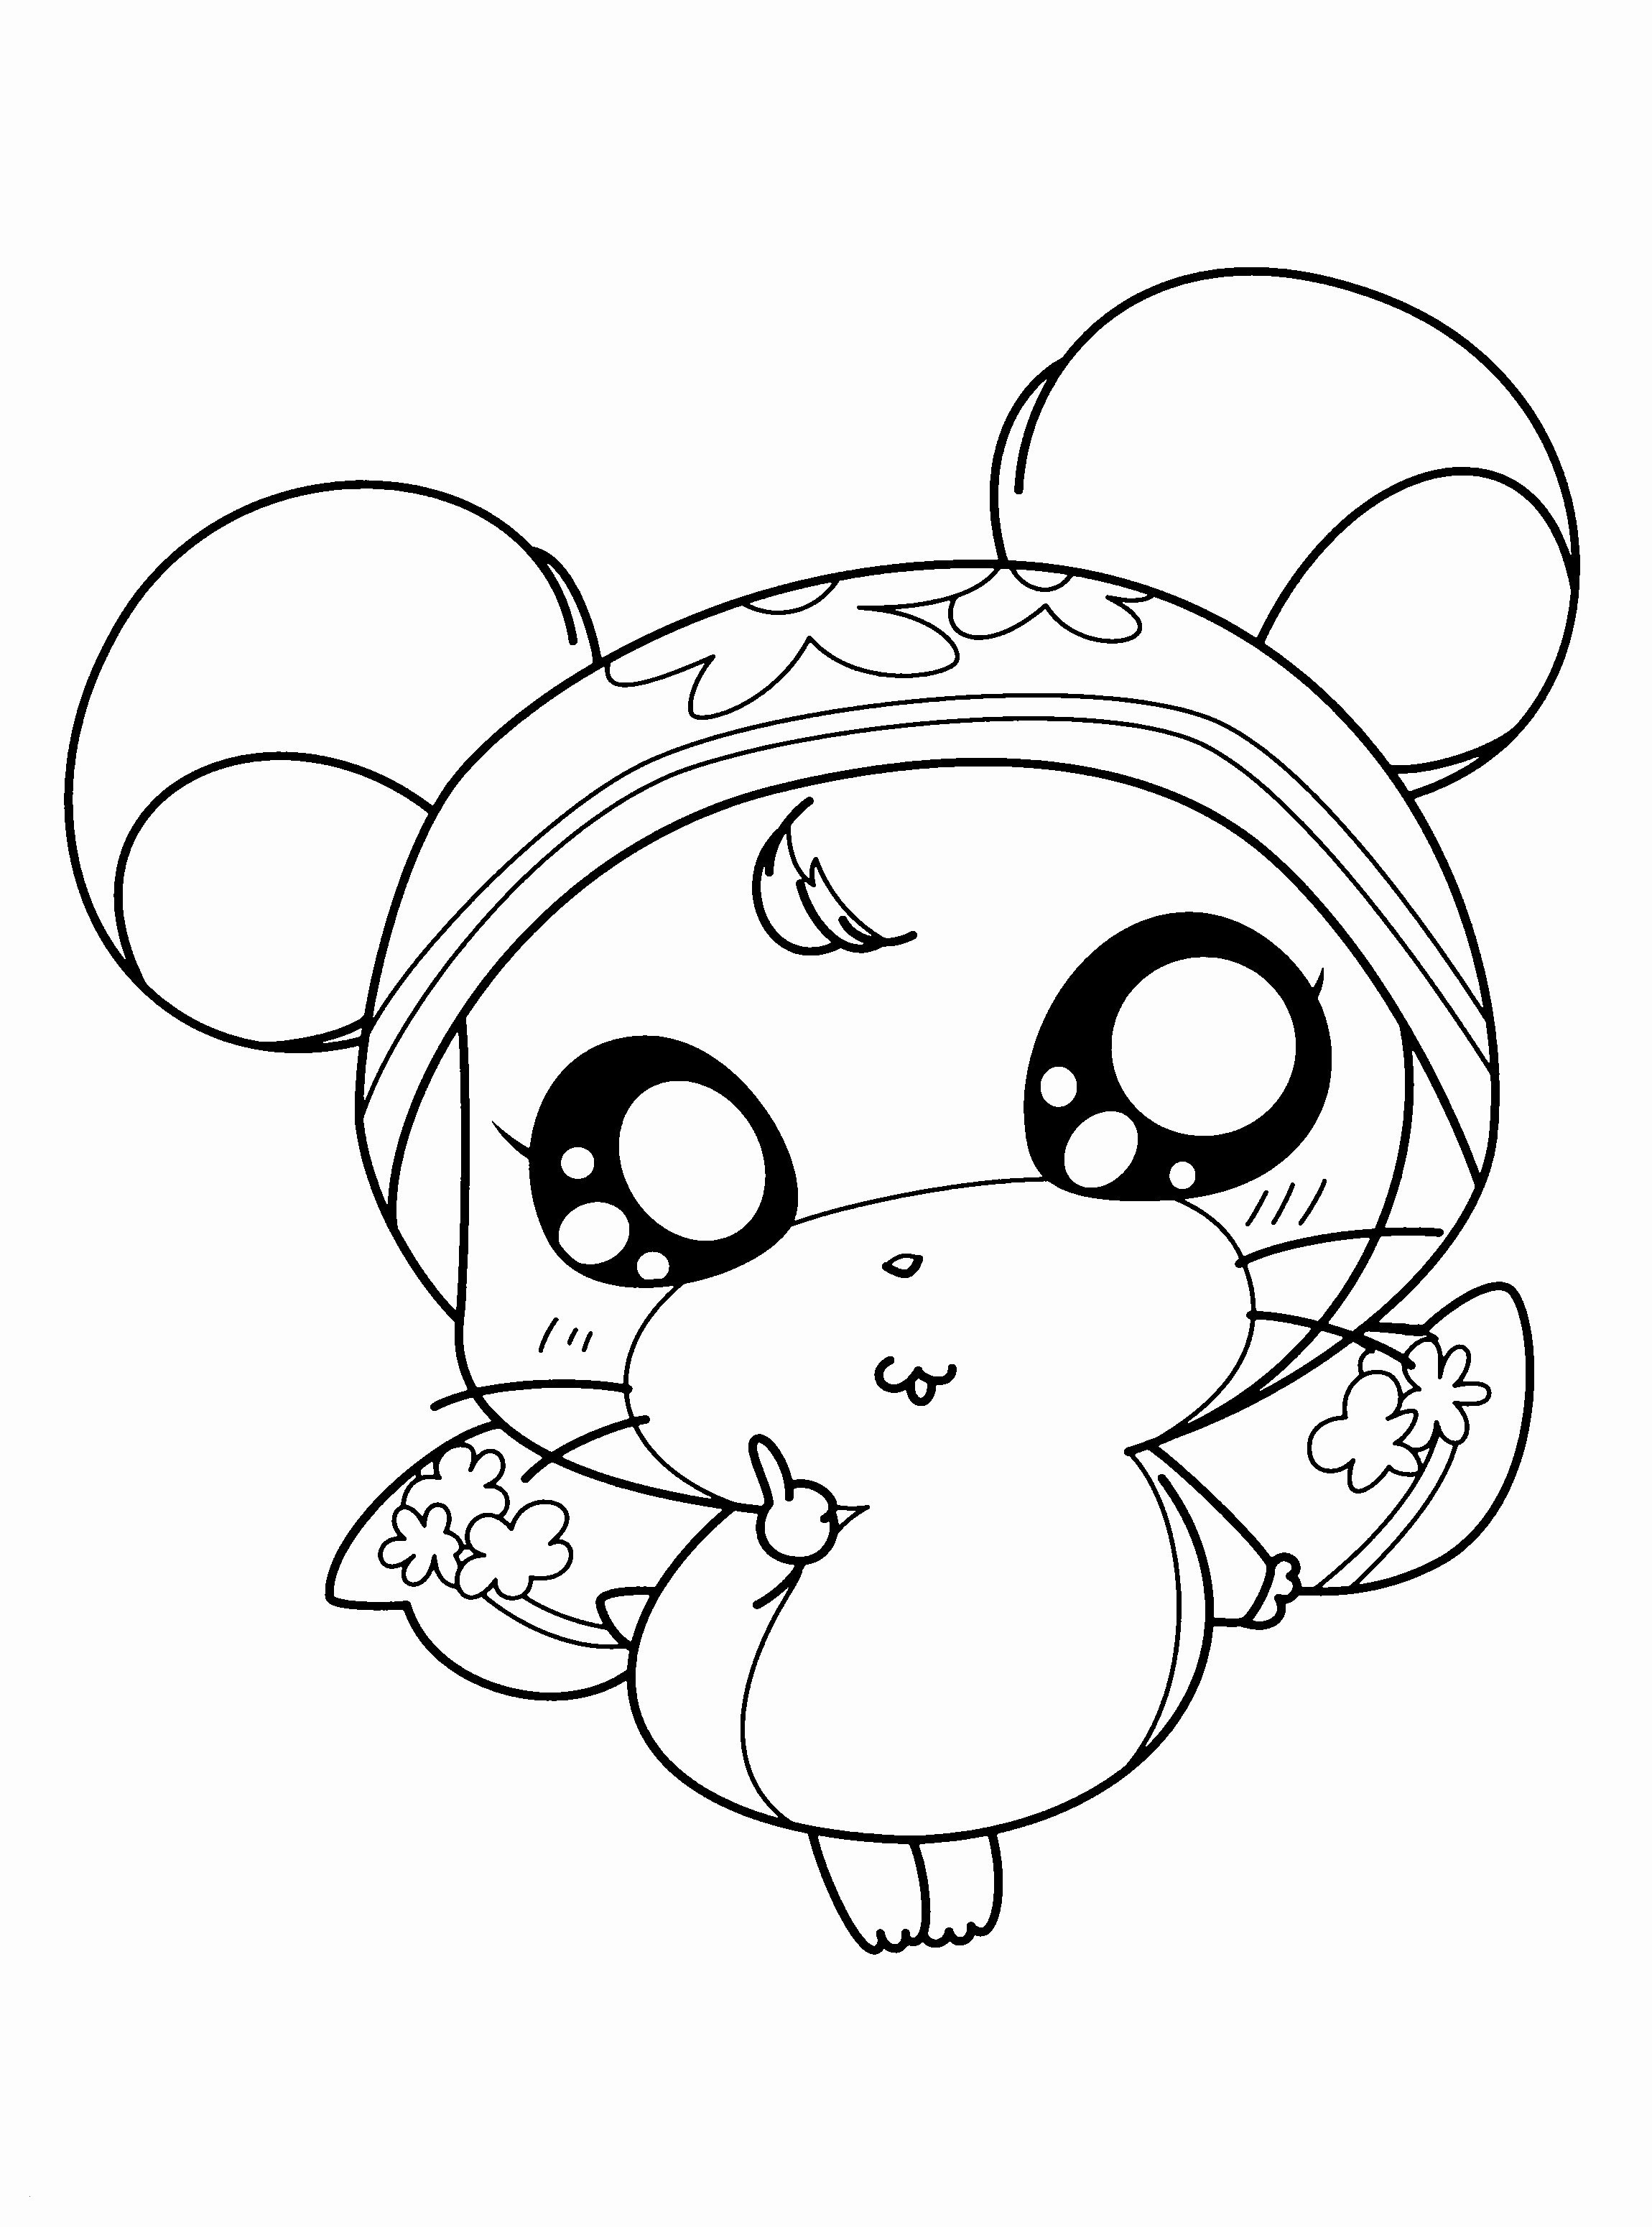 Pokemon Printable Coloring Pages Beautiful Printable Coloring Pages for Kids Elegant Coloring Printables 0d